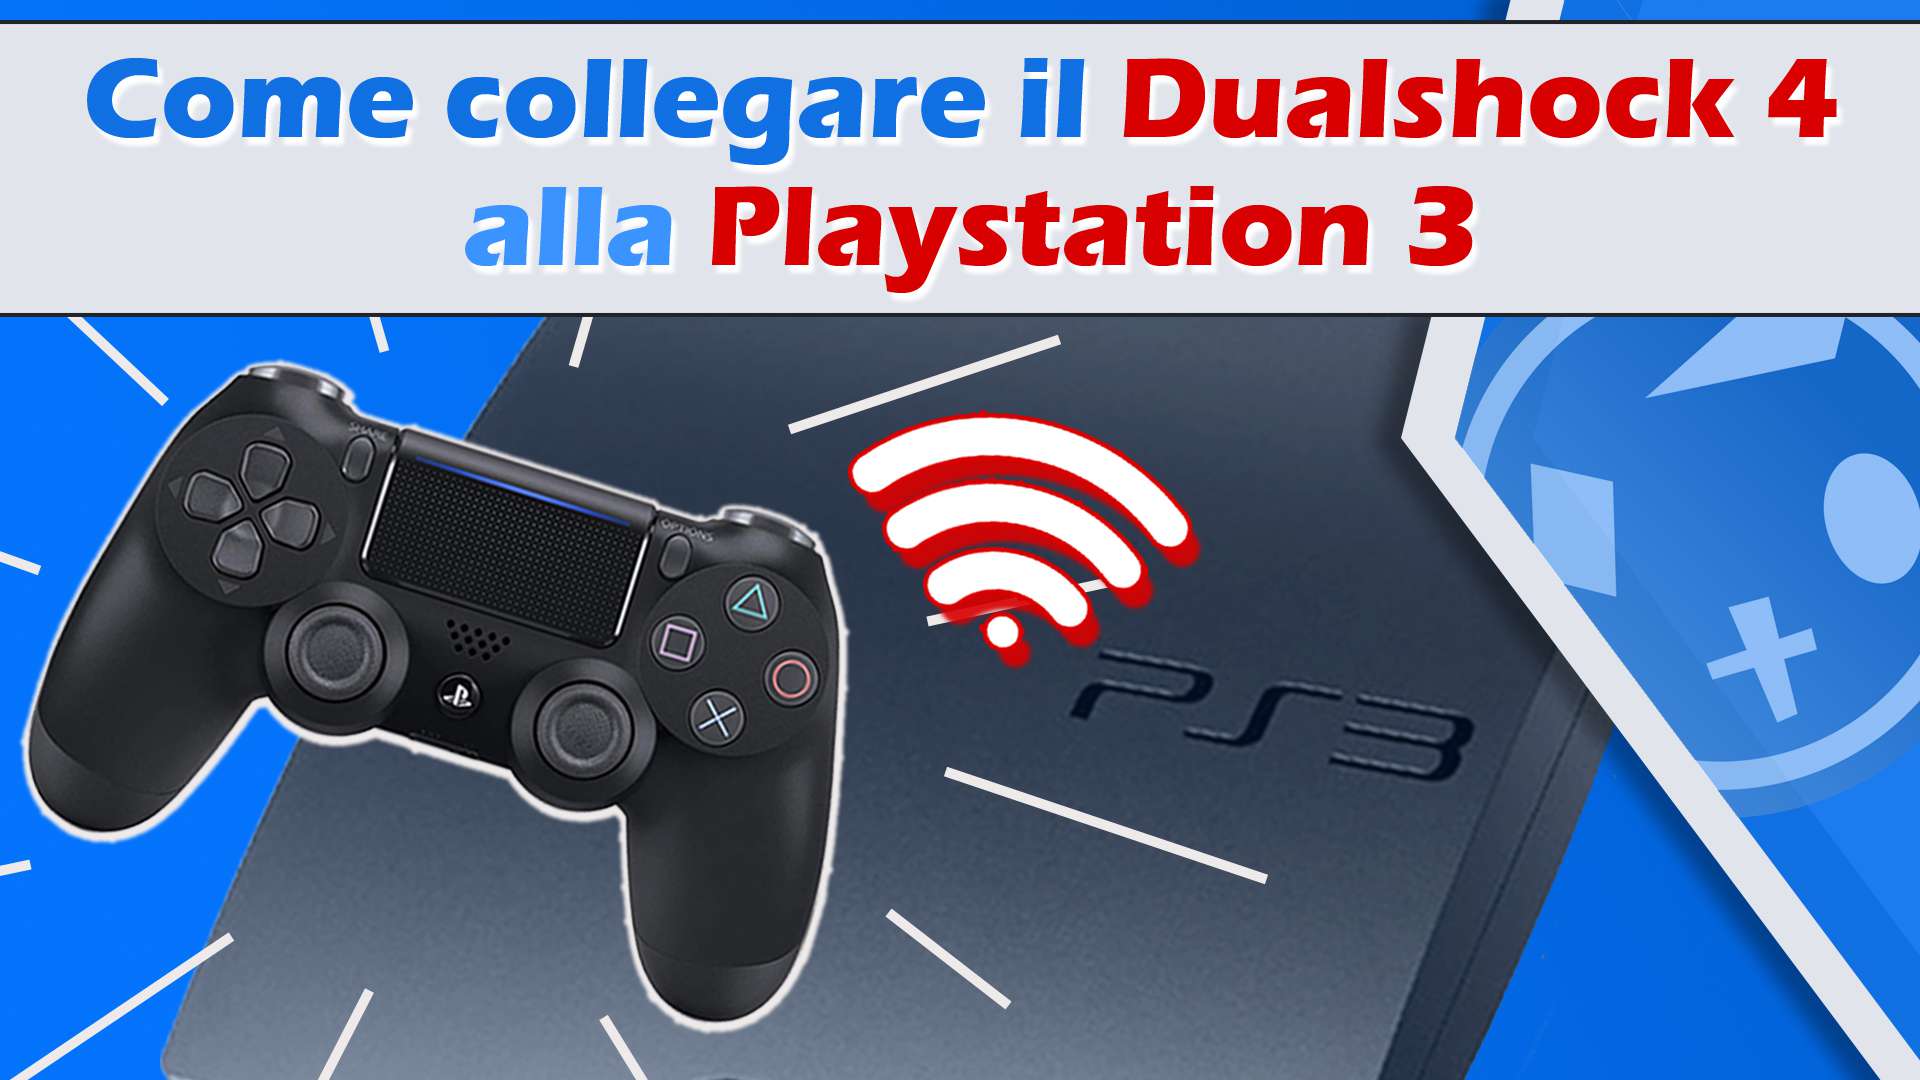 Come collegare il DualShock 4 a PlayStation 3 wireless - Guida -  PlayStationBit 5.0